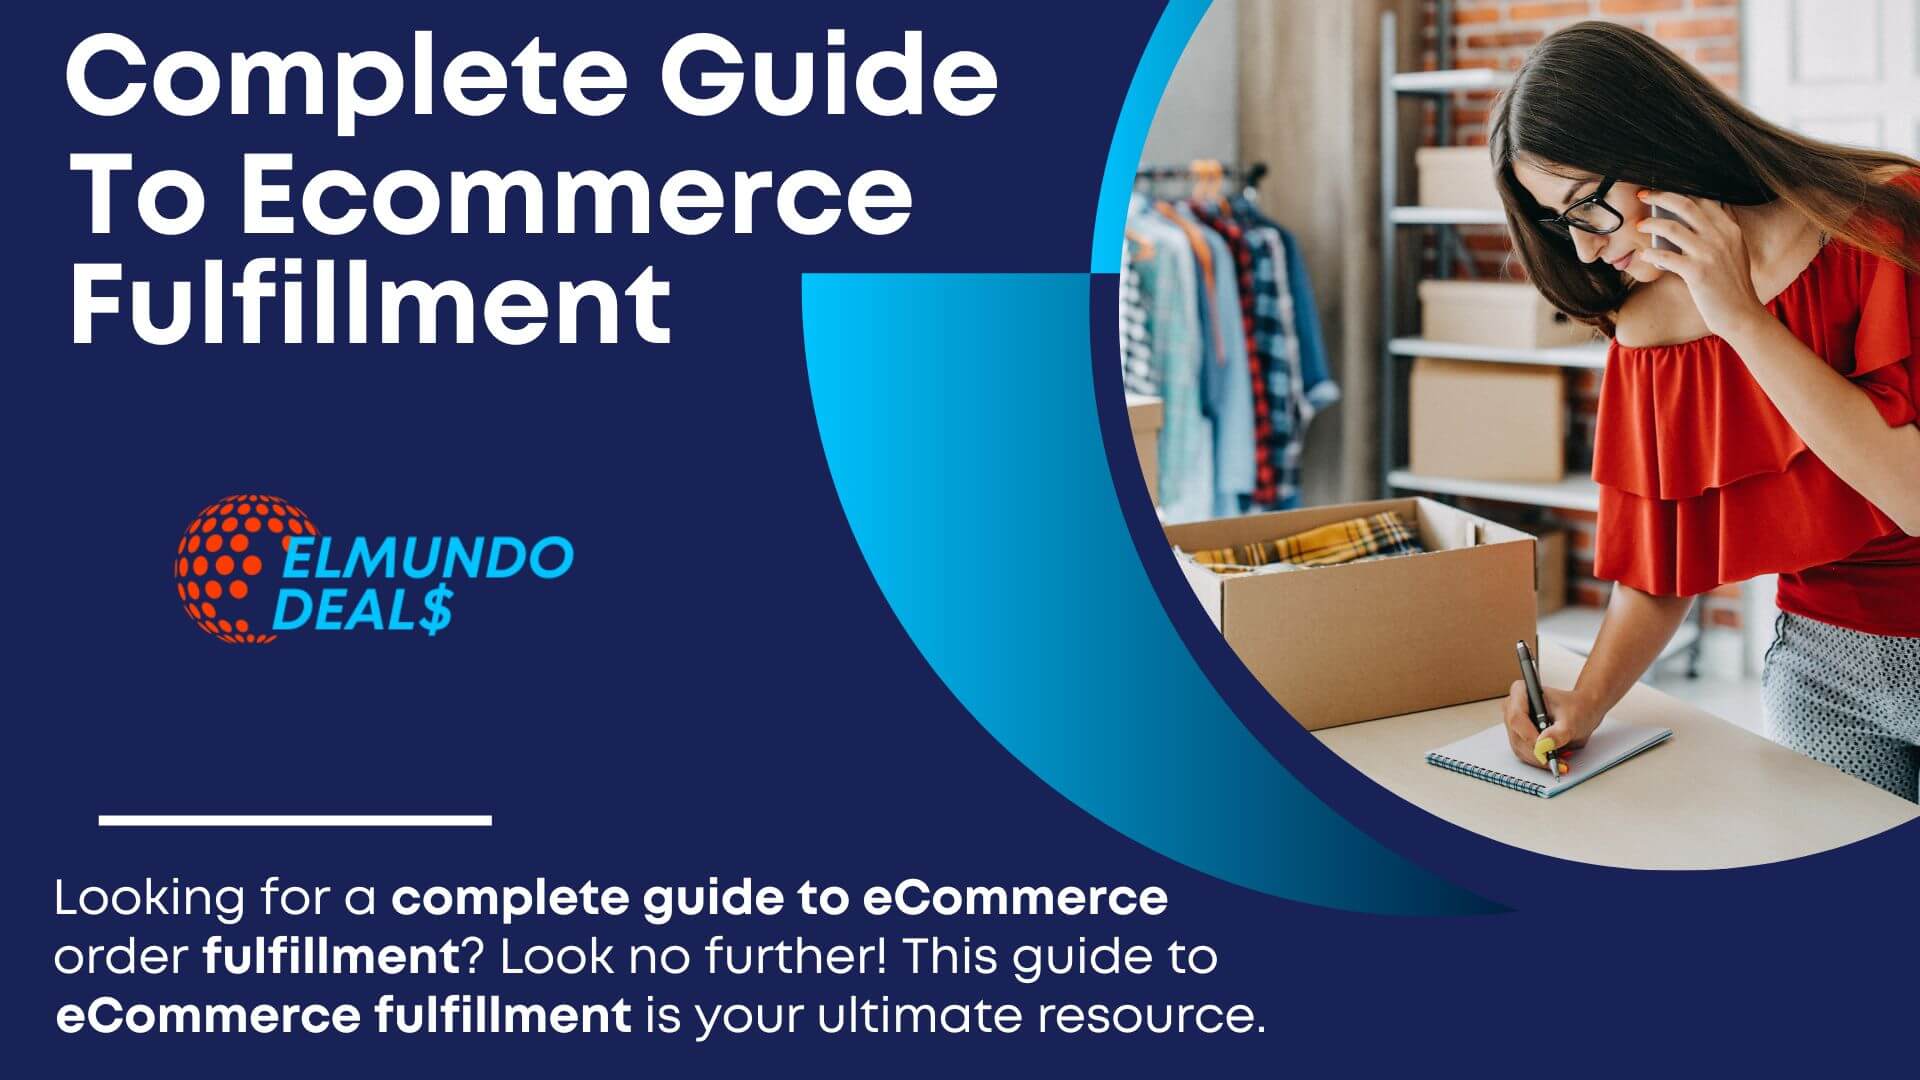 The Complete Guide To Ecommerce Fulfillment - Ecommerce Order Fulfillment